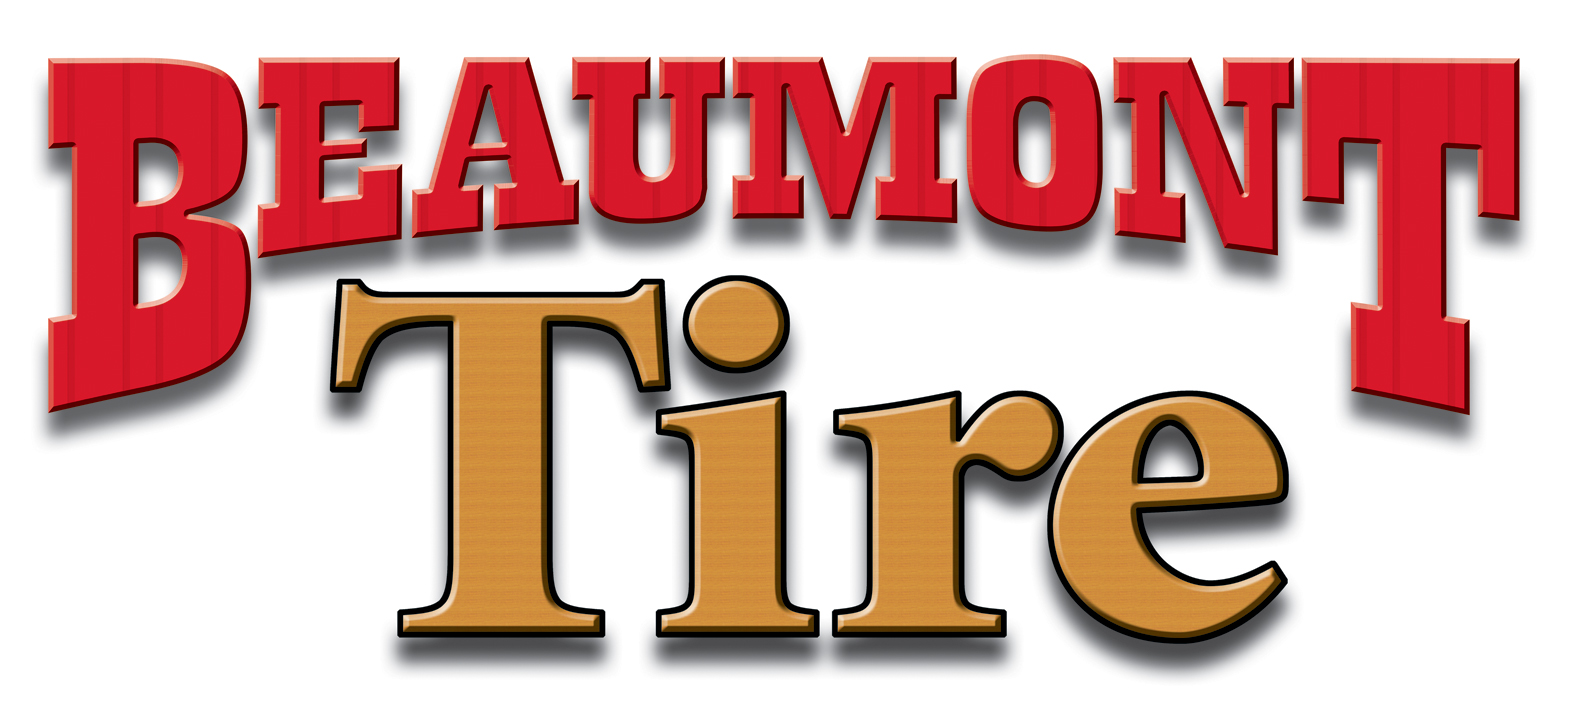 Beaumont Tire - Discount Tires in Beaumont, CA